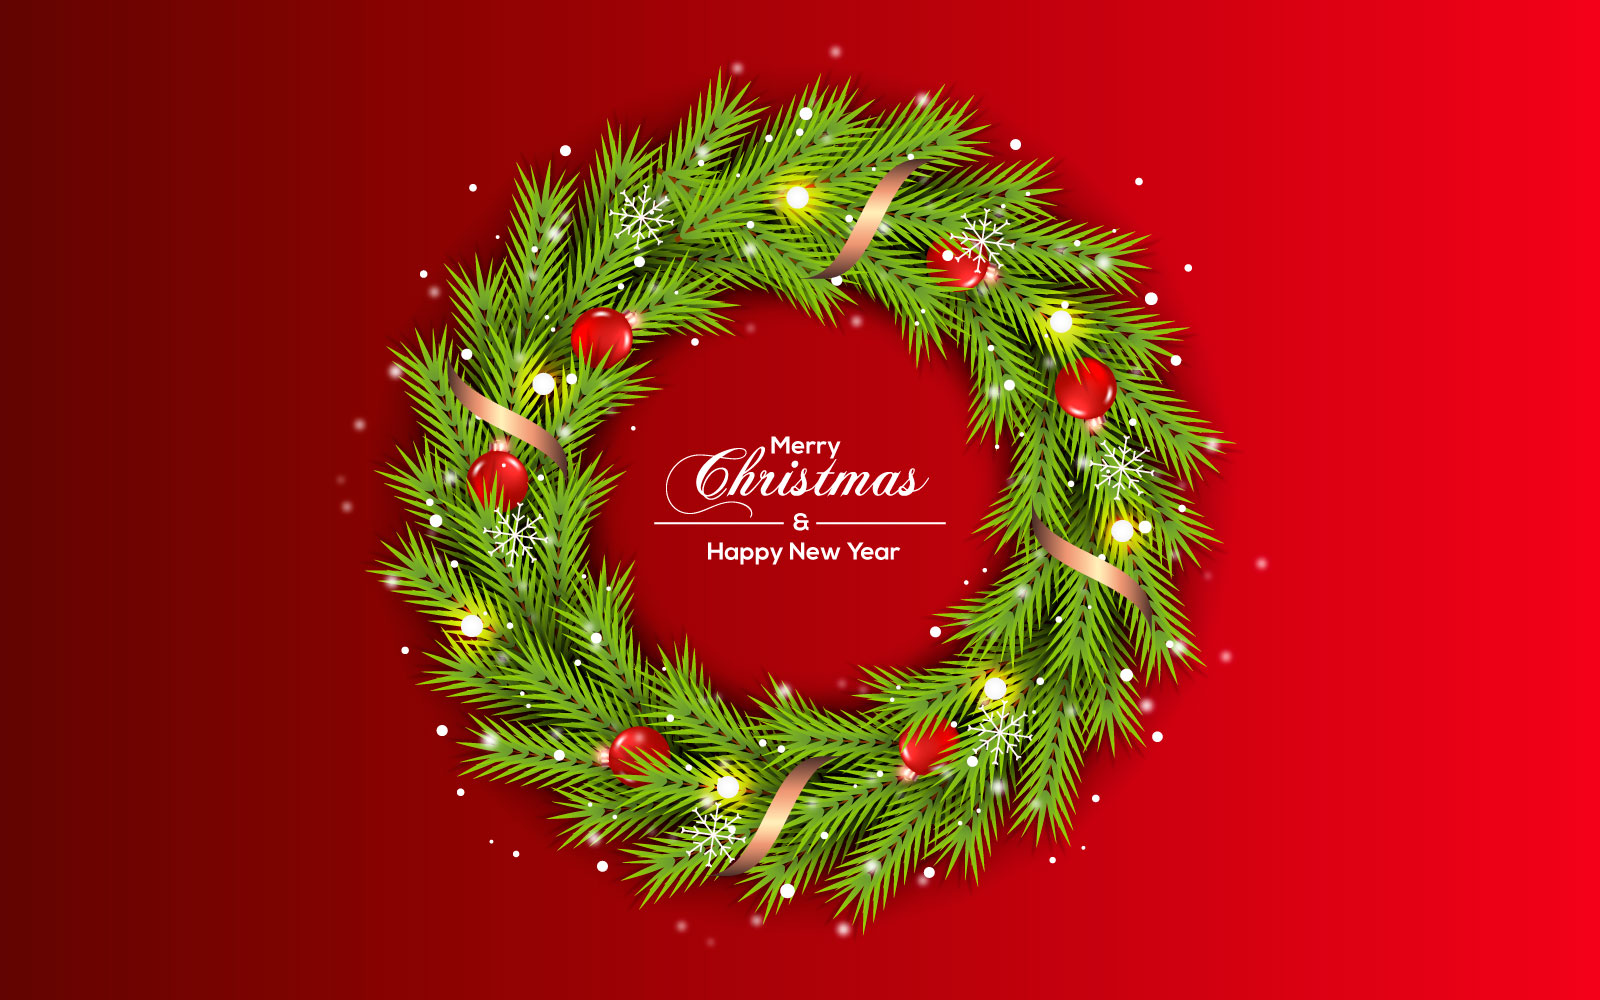 Best christmas wishes wreath with decorated holiday wreath flat  illustration concept